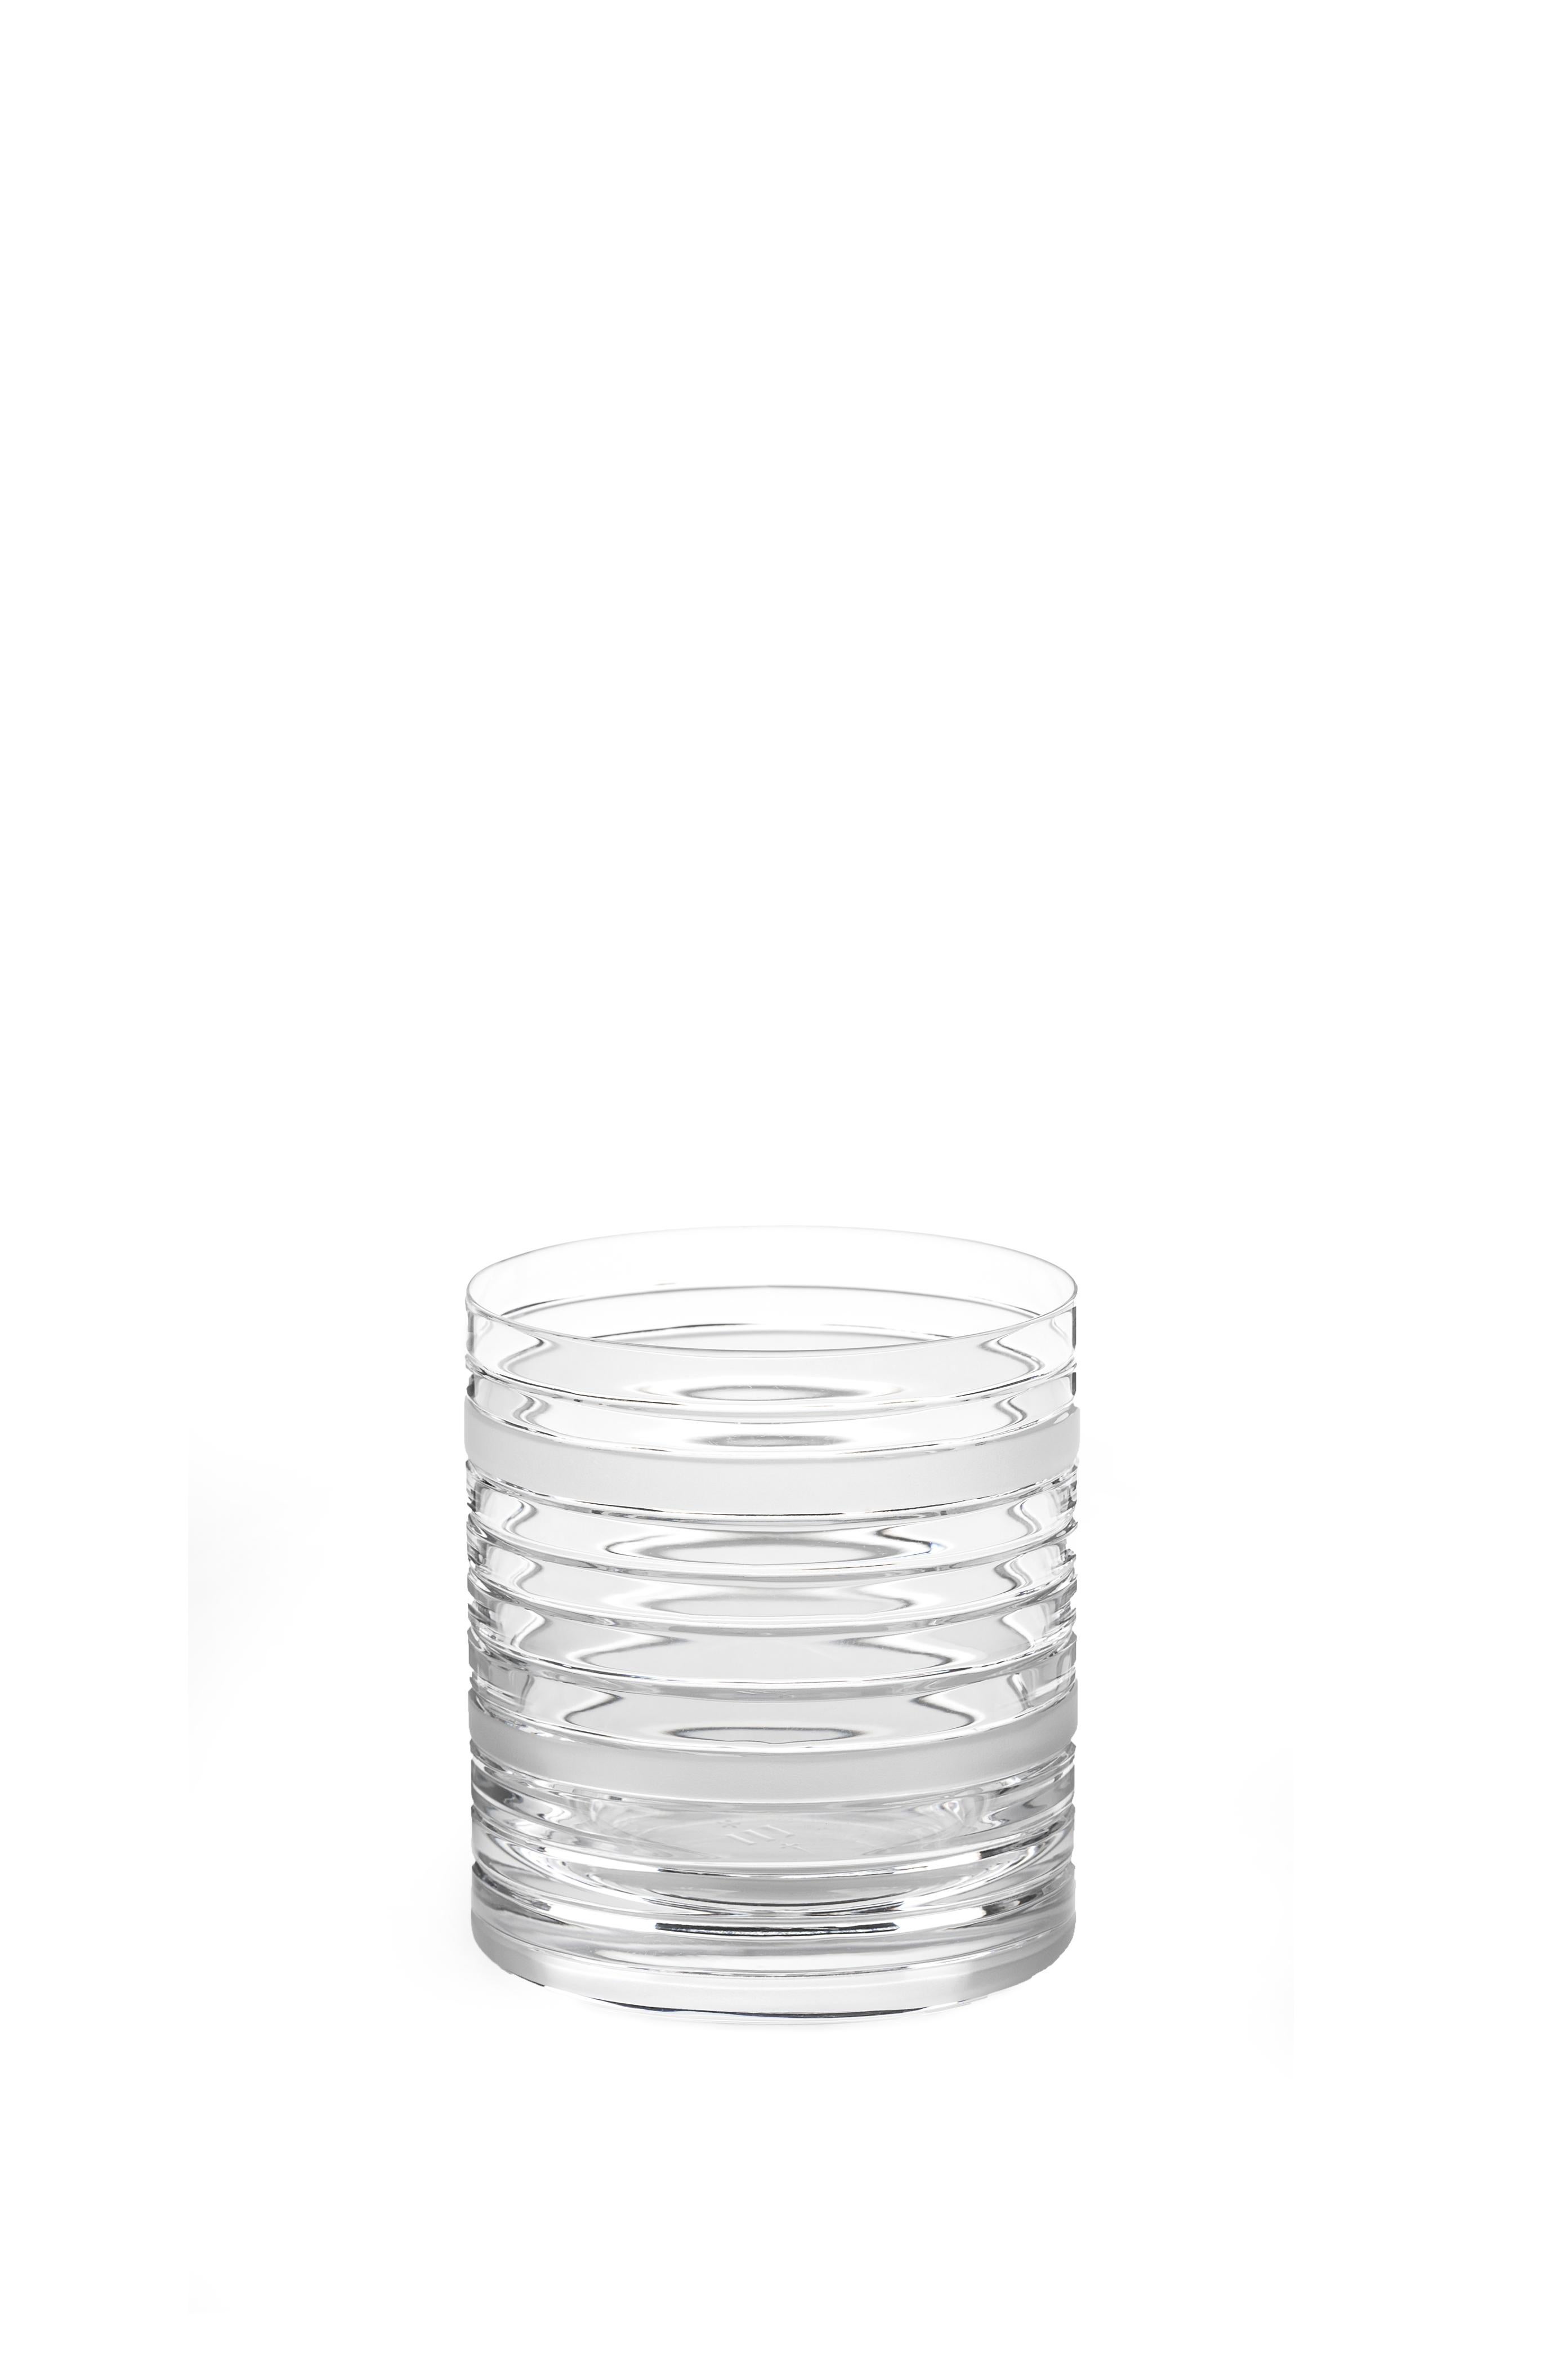 A low glass made by hand. 
A glass designed by Scholten & Baijings as part of our 'ELEMENTS' series.

The Collection: Elements
A rich canon of graphic markings defines the ELEMENTS series of lead crystal. Cuts and textures of varying depth and